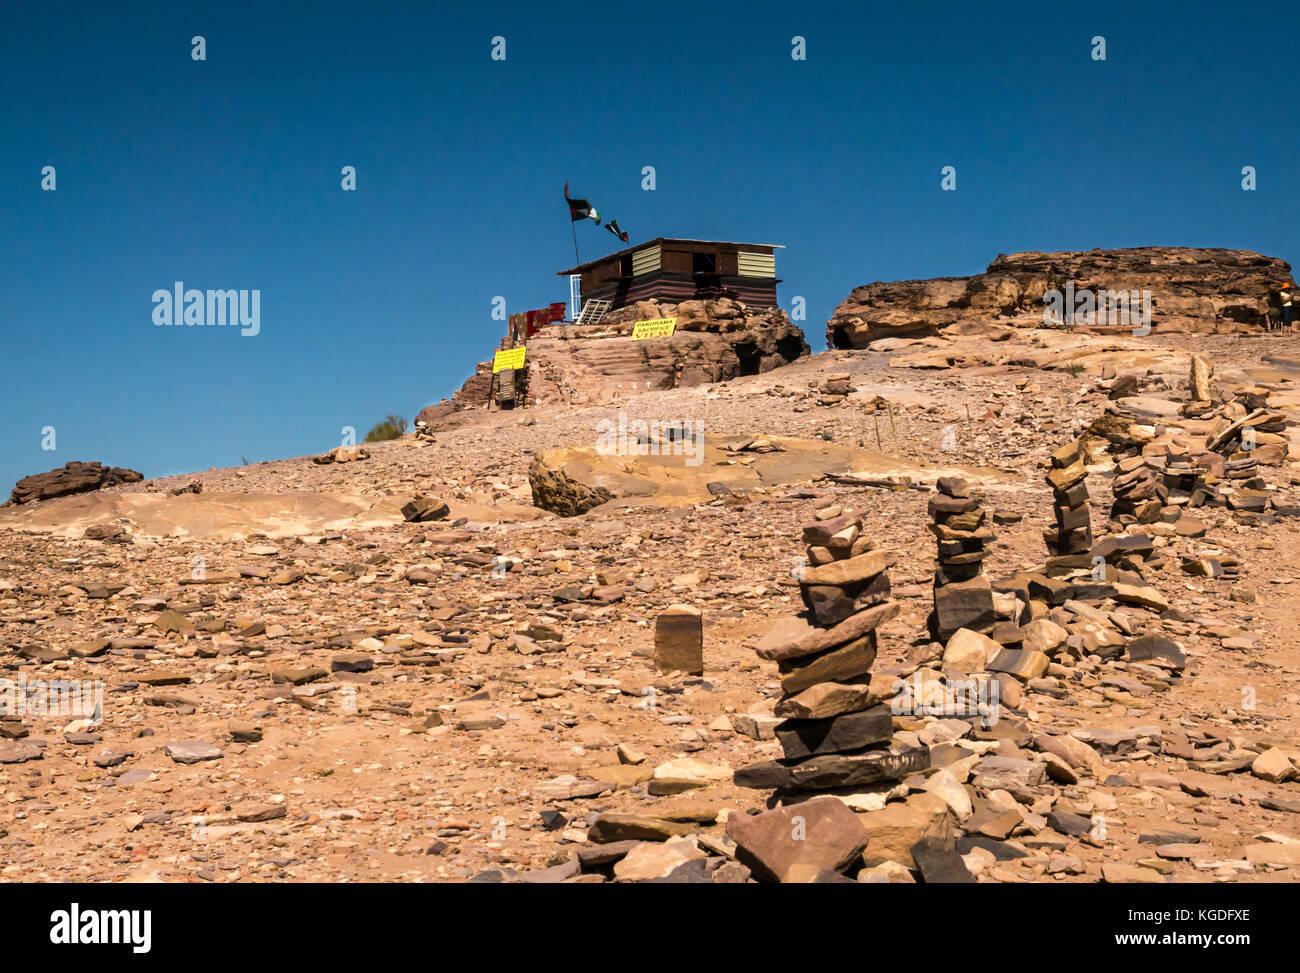 Sandy path lined with inukshuks or stone cairns leading to mountain top hut, Ad Deir, Petra, Jordan, Middle East Stock Photo